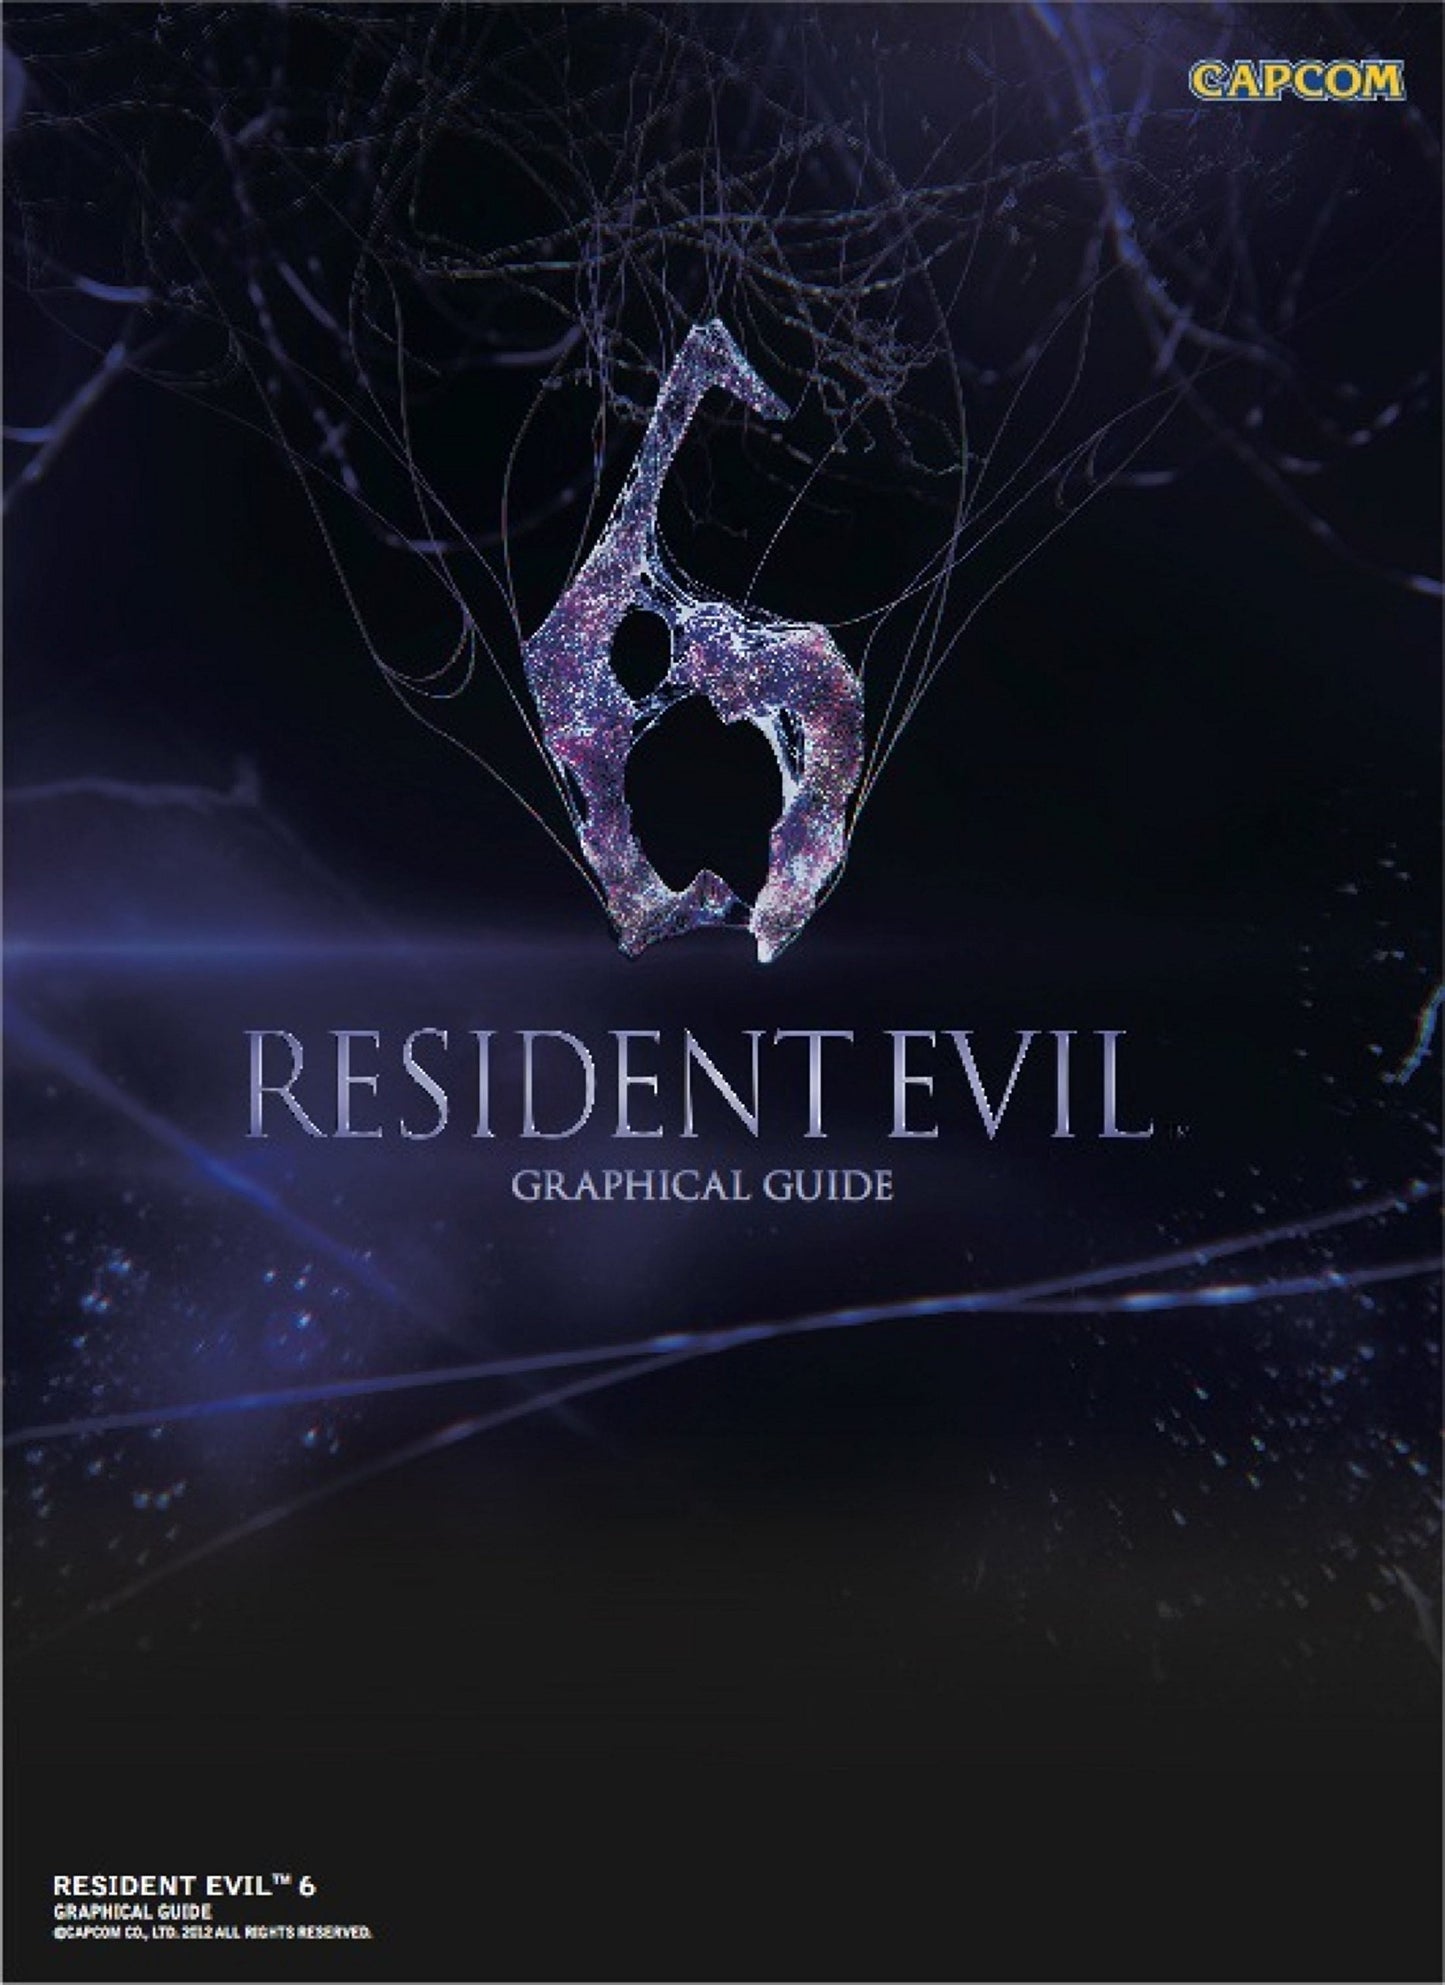 A photo of the artbook Resident Evil 6: Graphical Guide